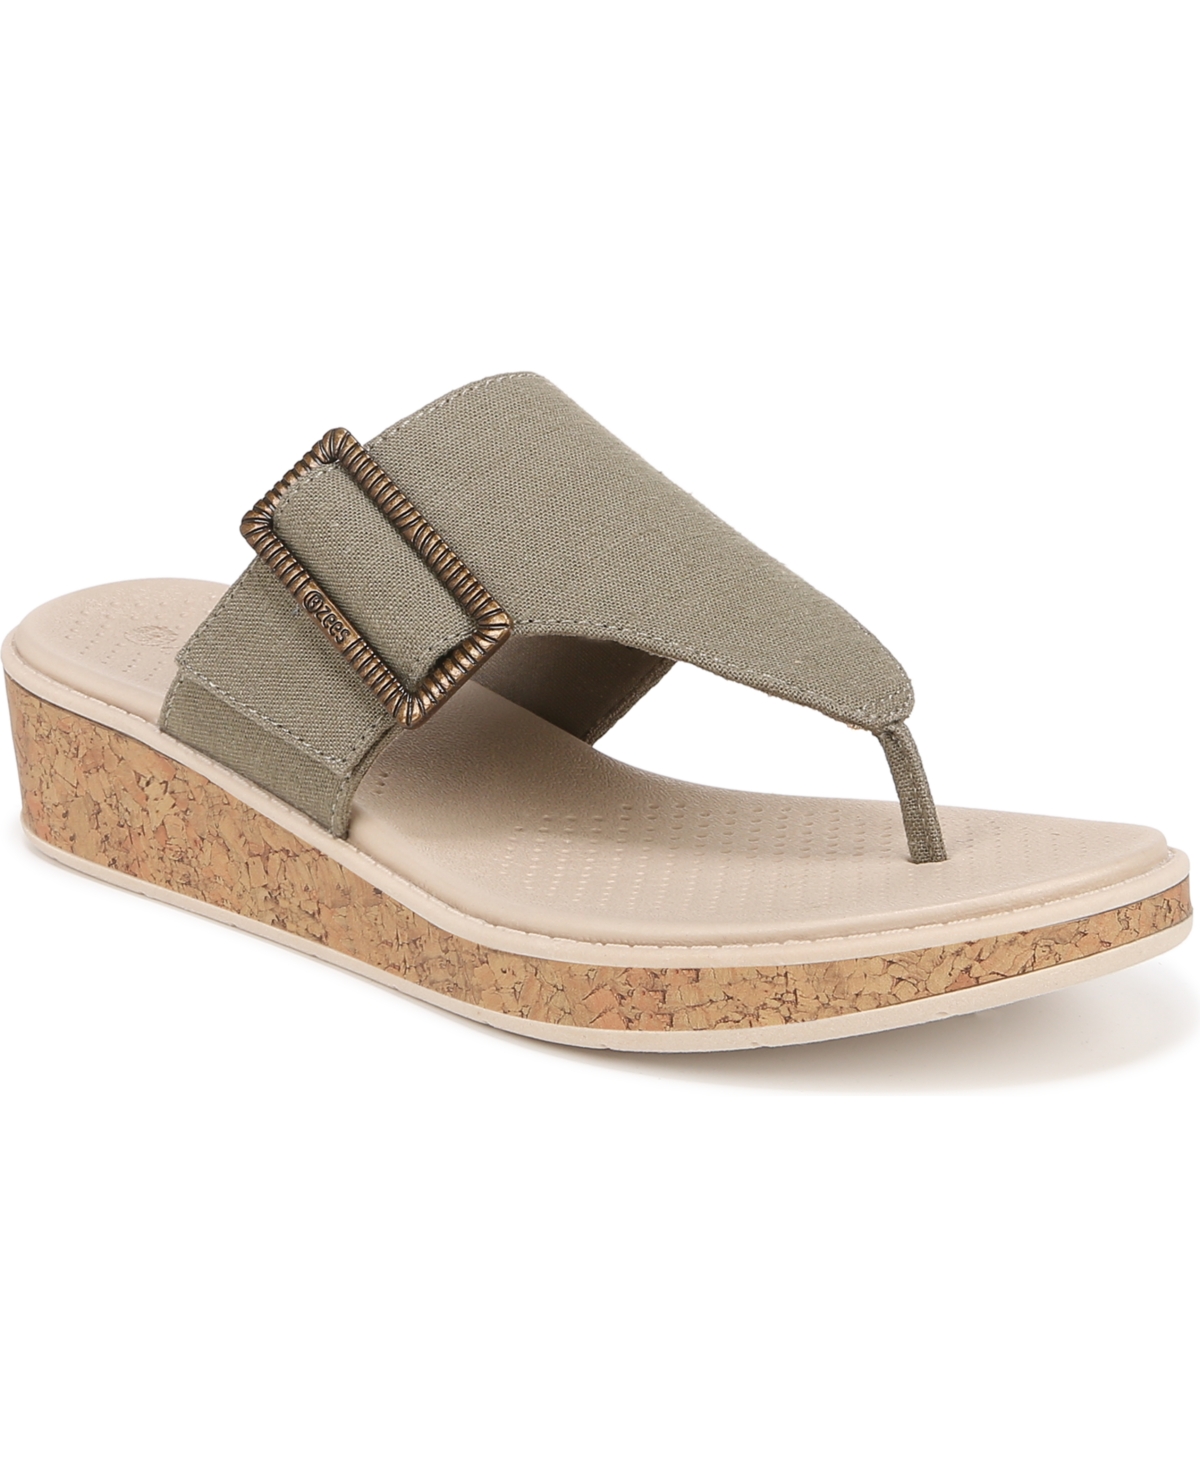 Bay Washable Thong Sandals - Olive Green Fabric